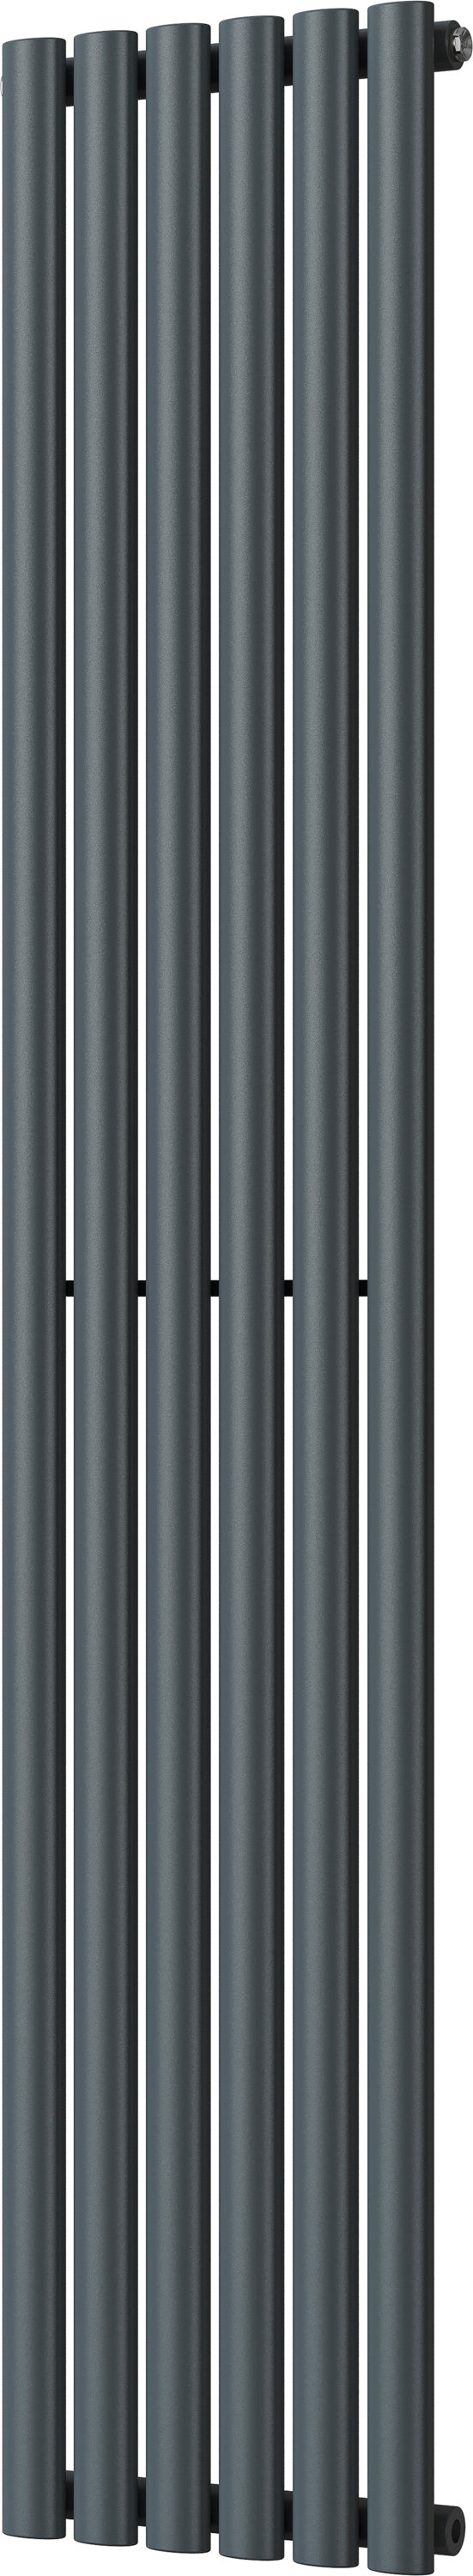 Omeara - Anthracite Vertical Radiator H1800mm x W348mm Single Panel